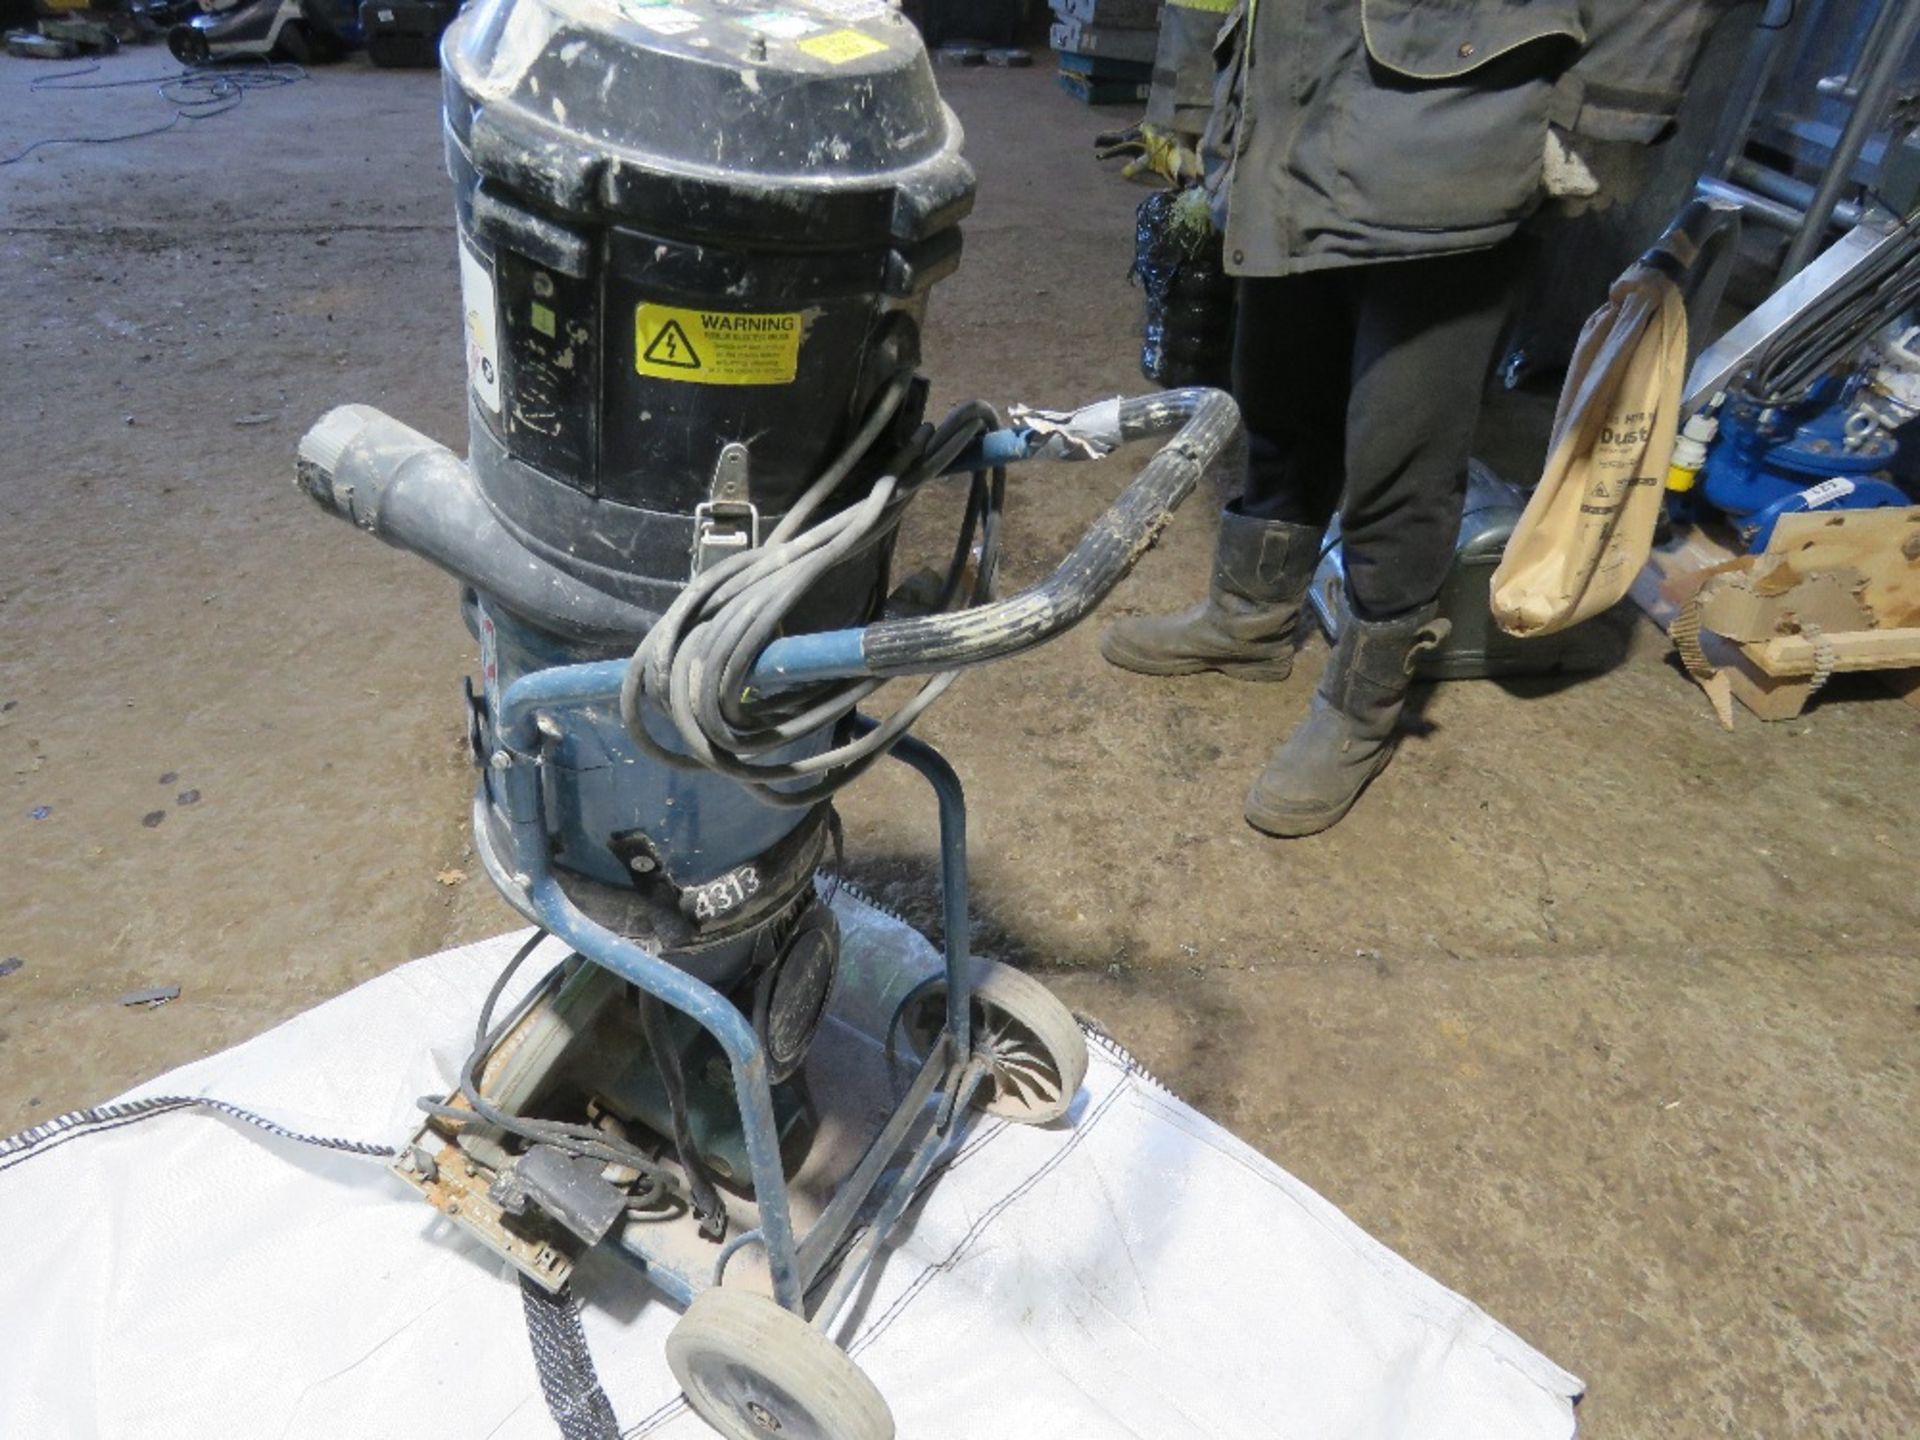 DUST CONTROL DC2900 110VOLT DUST EXTRACTION UNIT PLUS A MAKITA CIRCULAR SAW. - Image 3 of 3